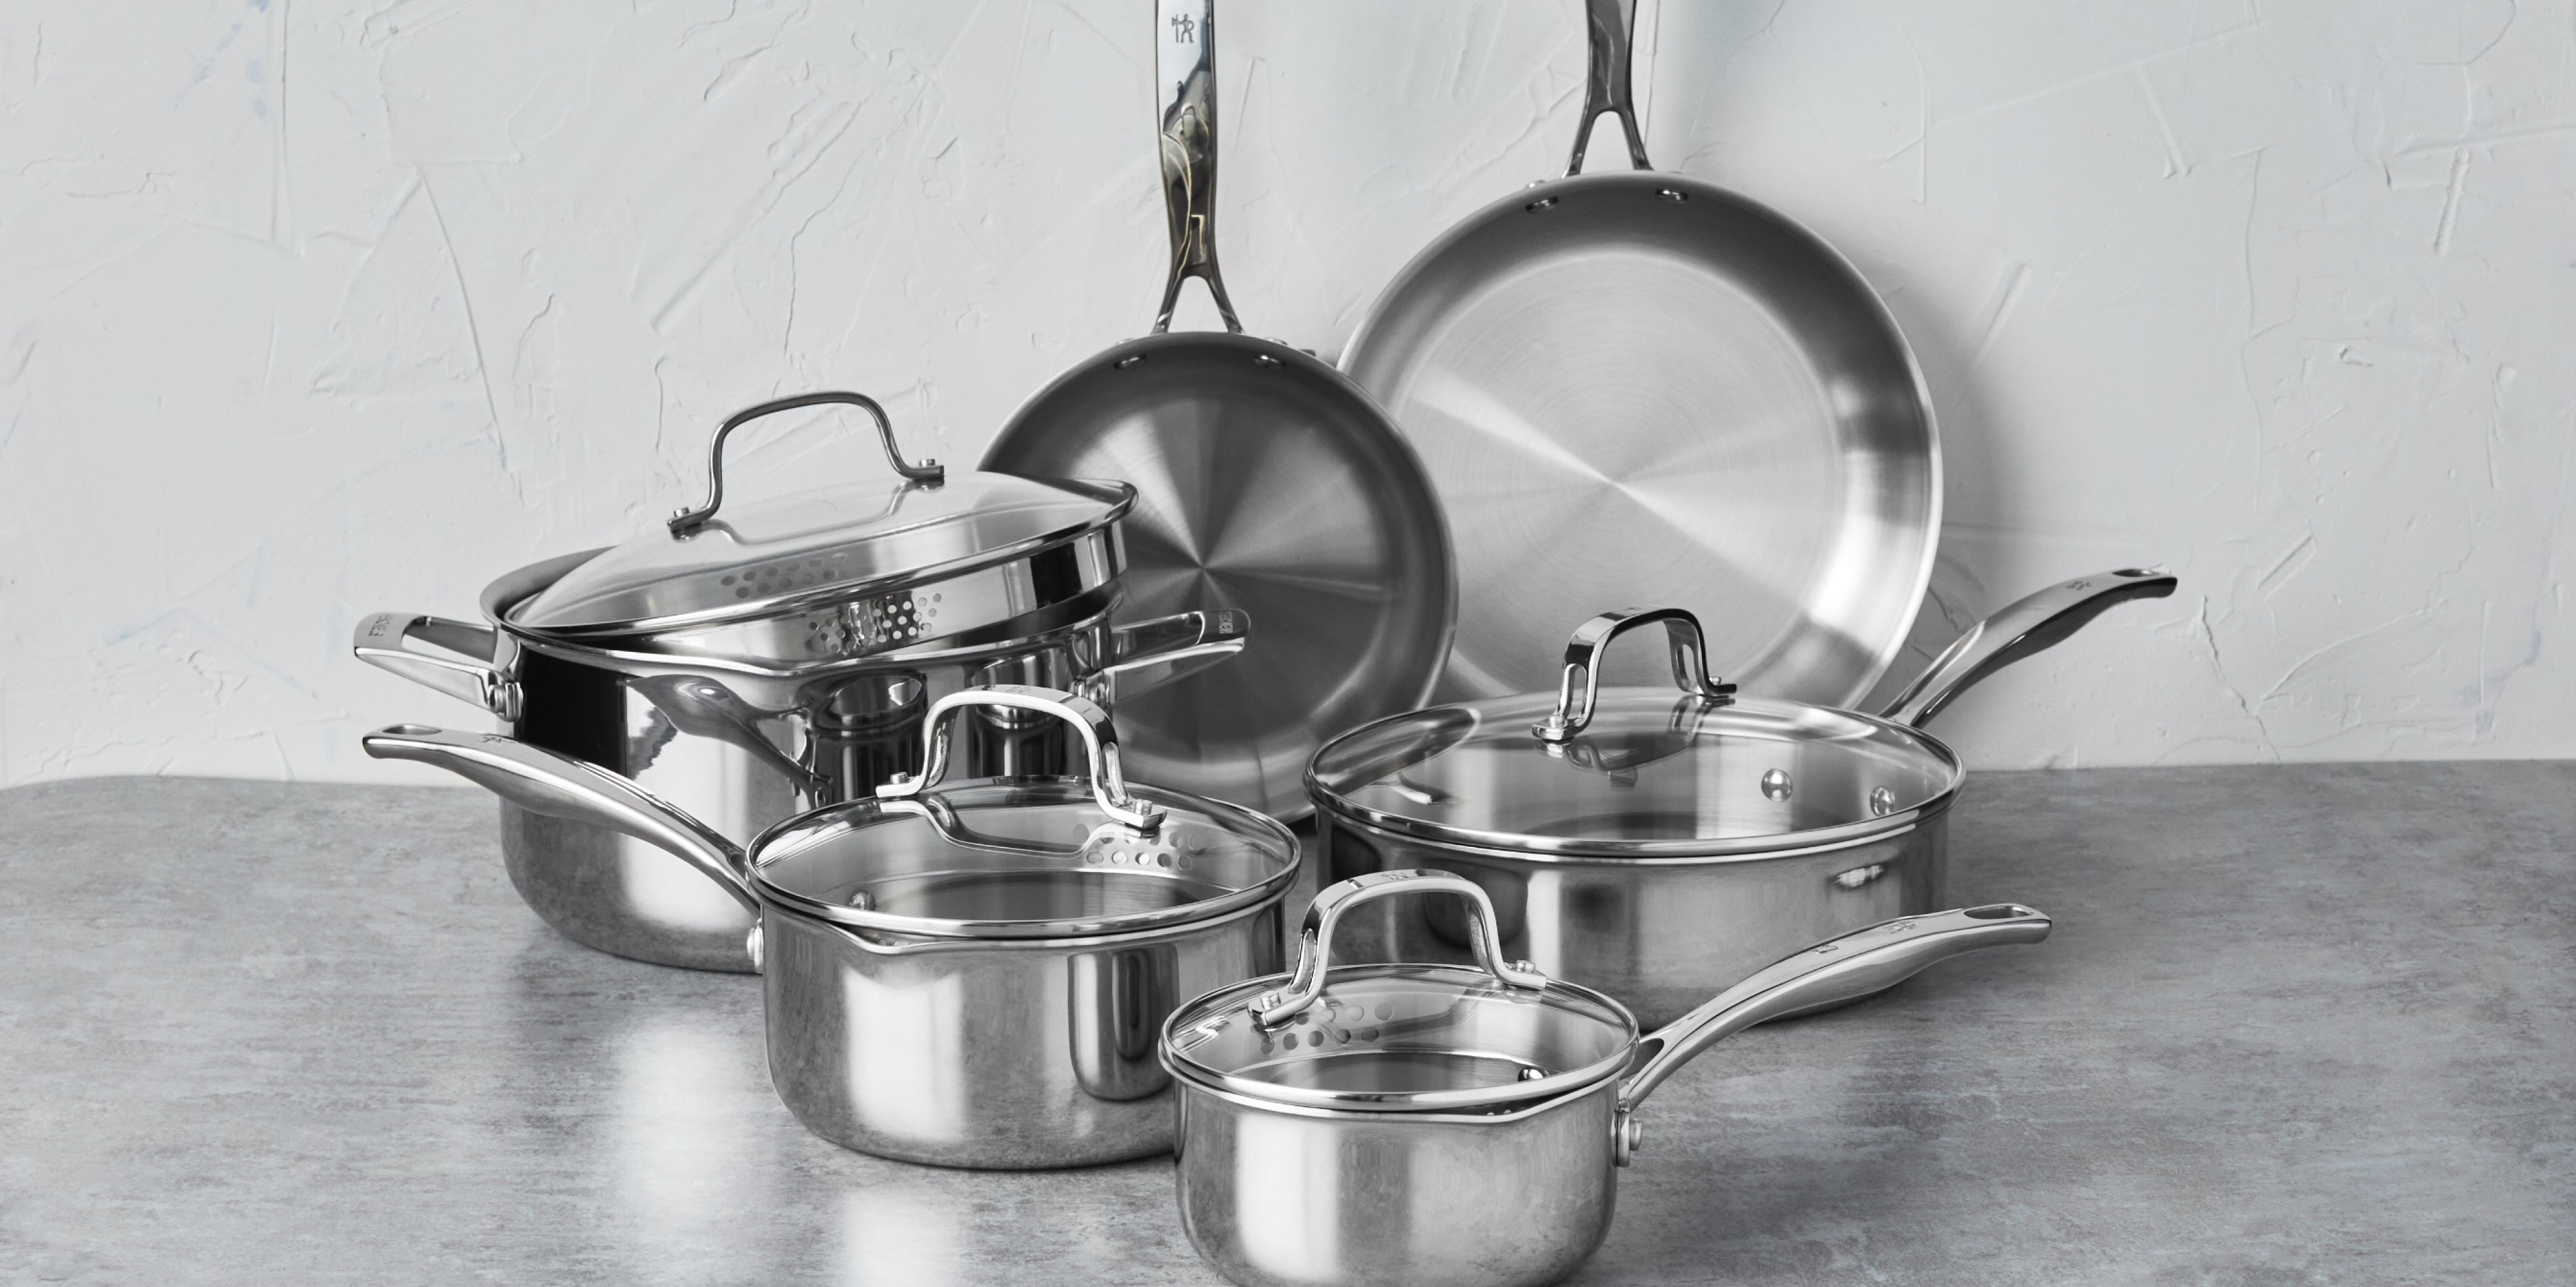 https://www.zwilling.com/on/demandware.static/-/Sites-zwilling-us-Library/default/dw24b650b4/images/product-content/masonry-content/henckels/cookware/henckels-h3/H3UNCOATED_main-01.jpg